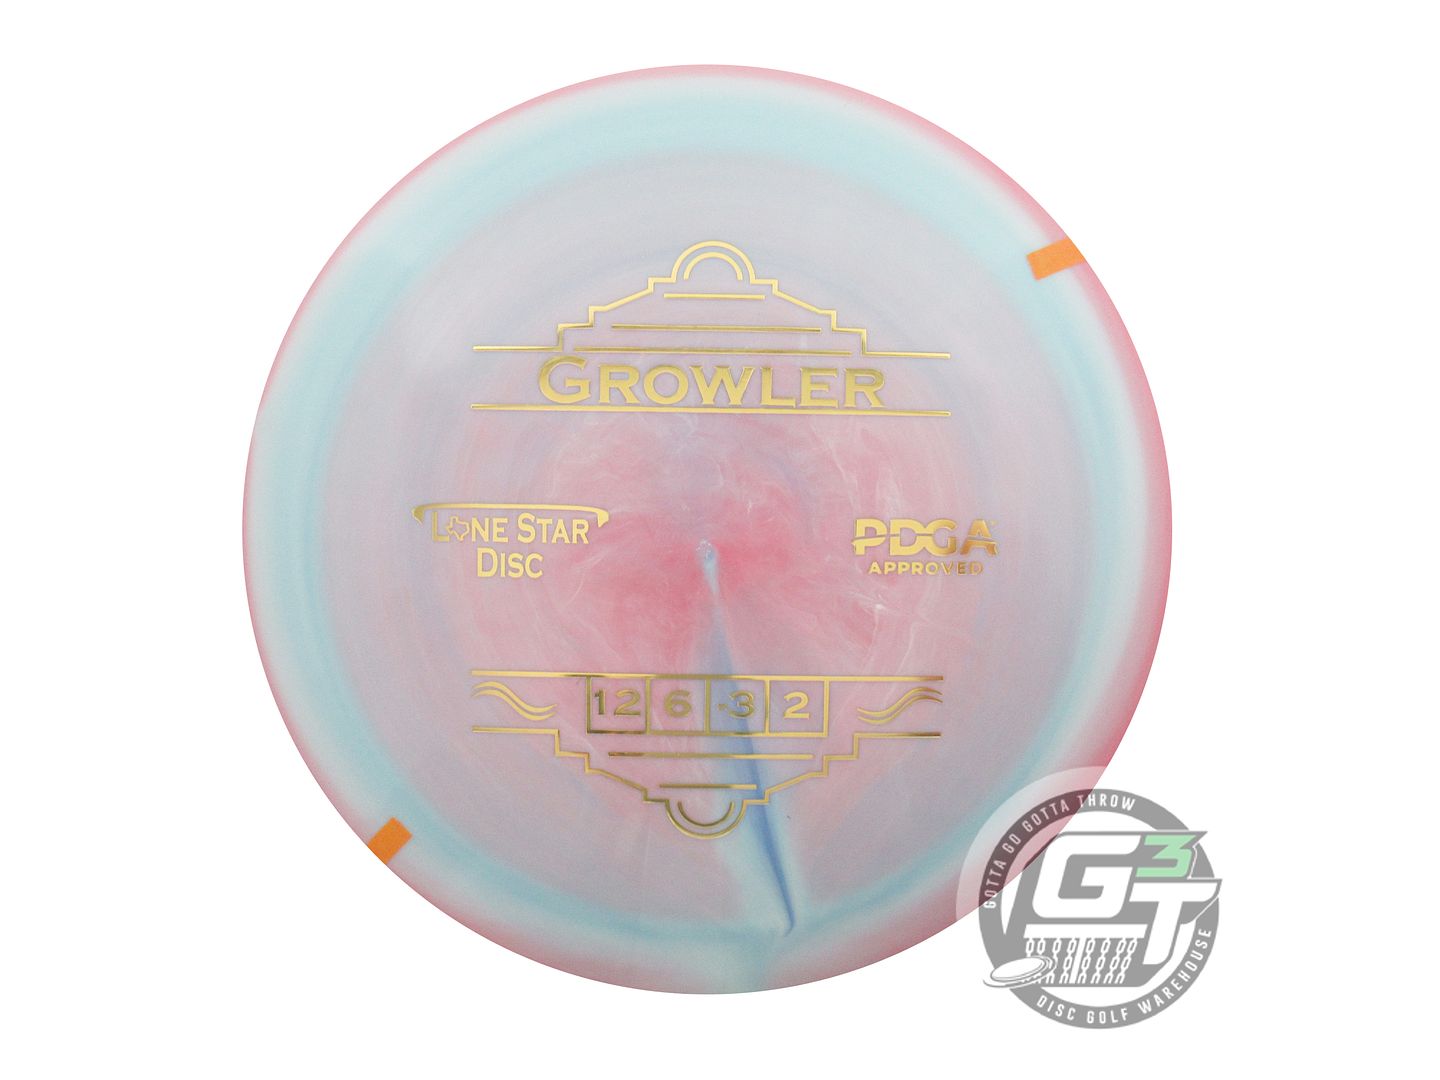 Lone Star Bravo Growler Distance Driver Golf Disc (Individually Listed)